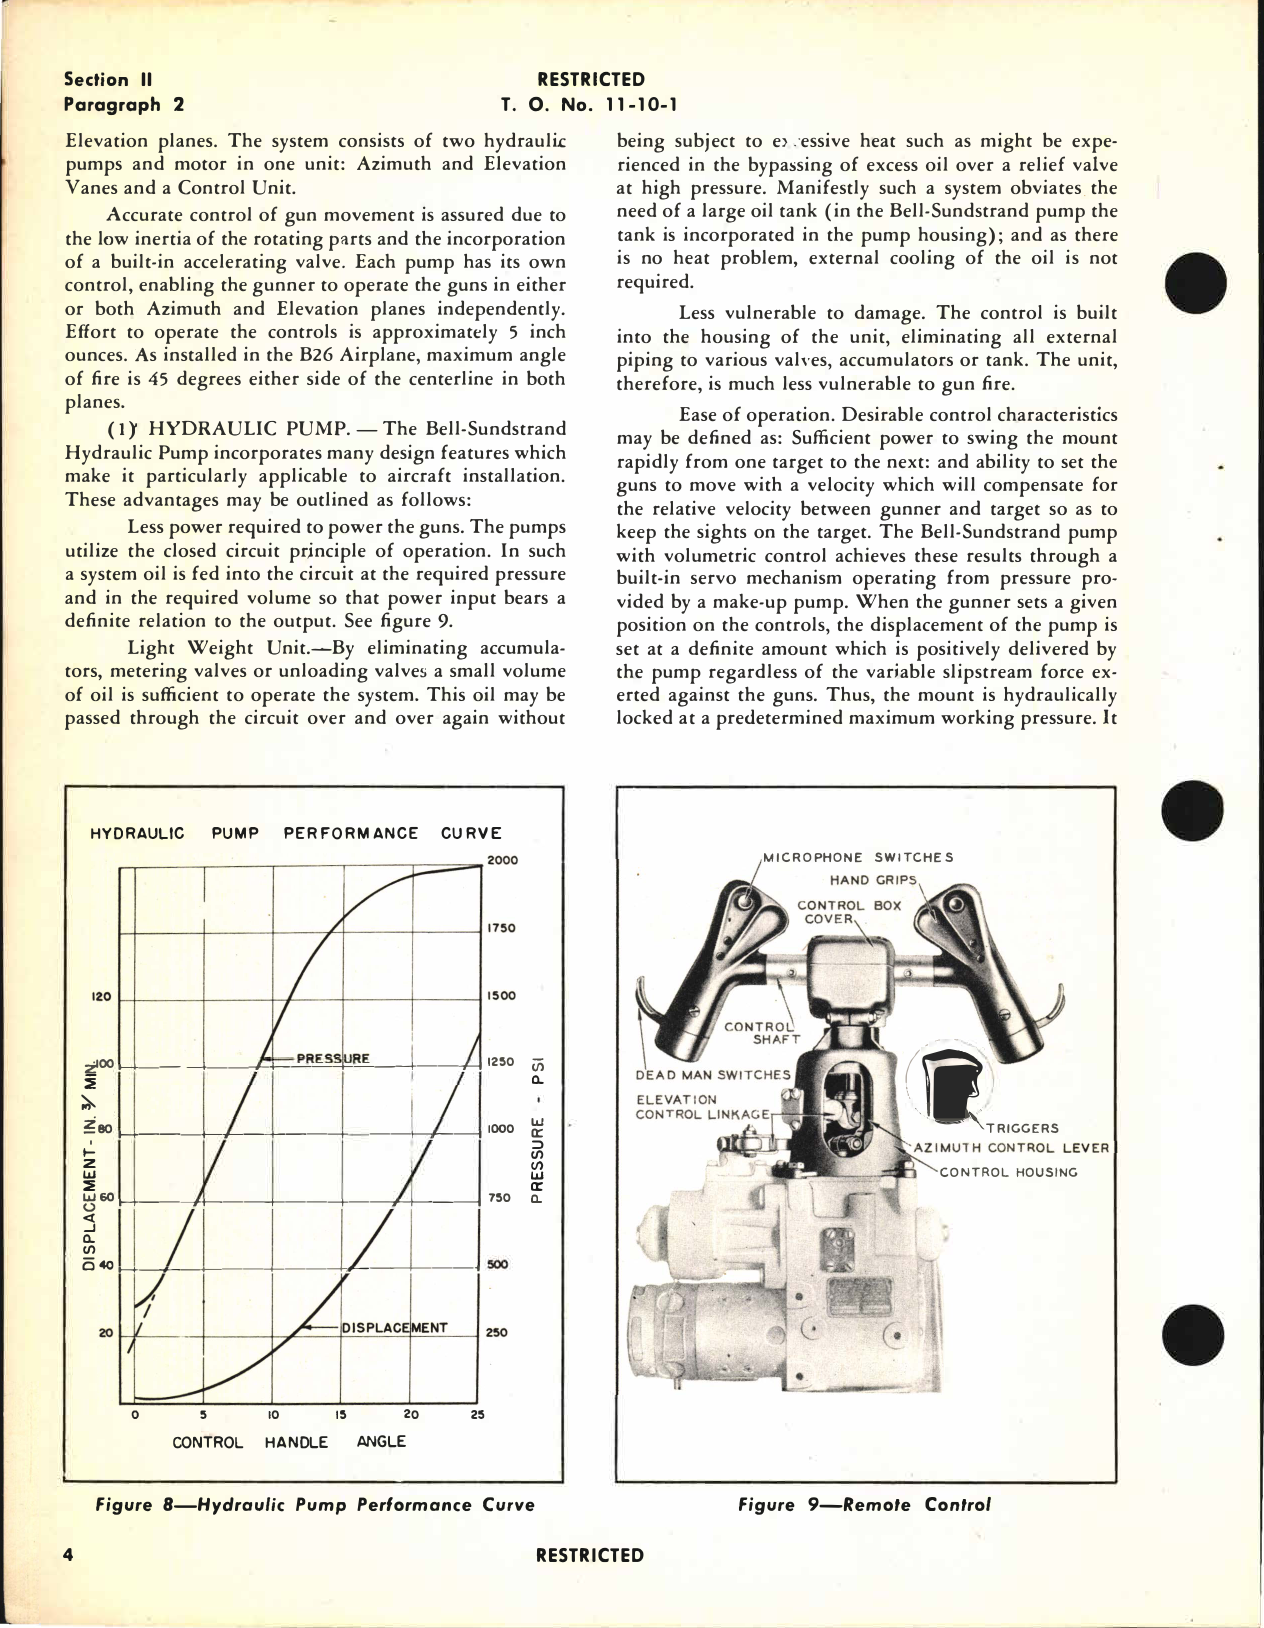 Sample page 8 from AirCorps Library document: Handbook of Instructions with Parts Catalog for Type M-6 Gun Mount Assembly